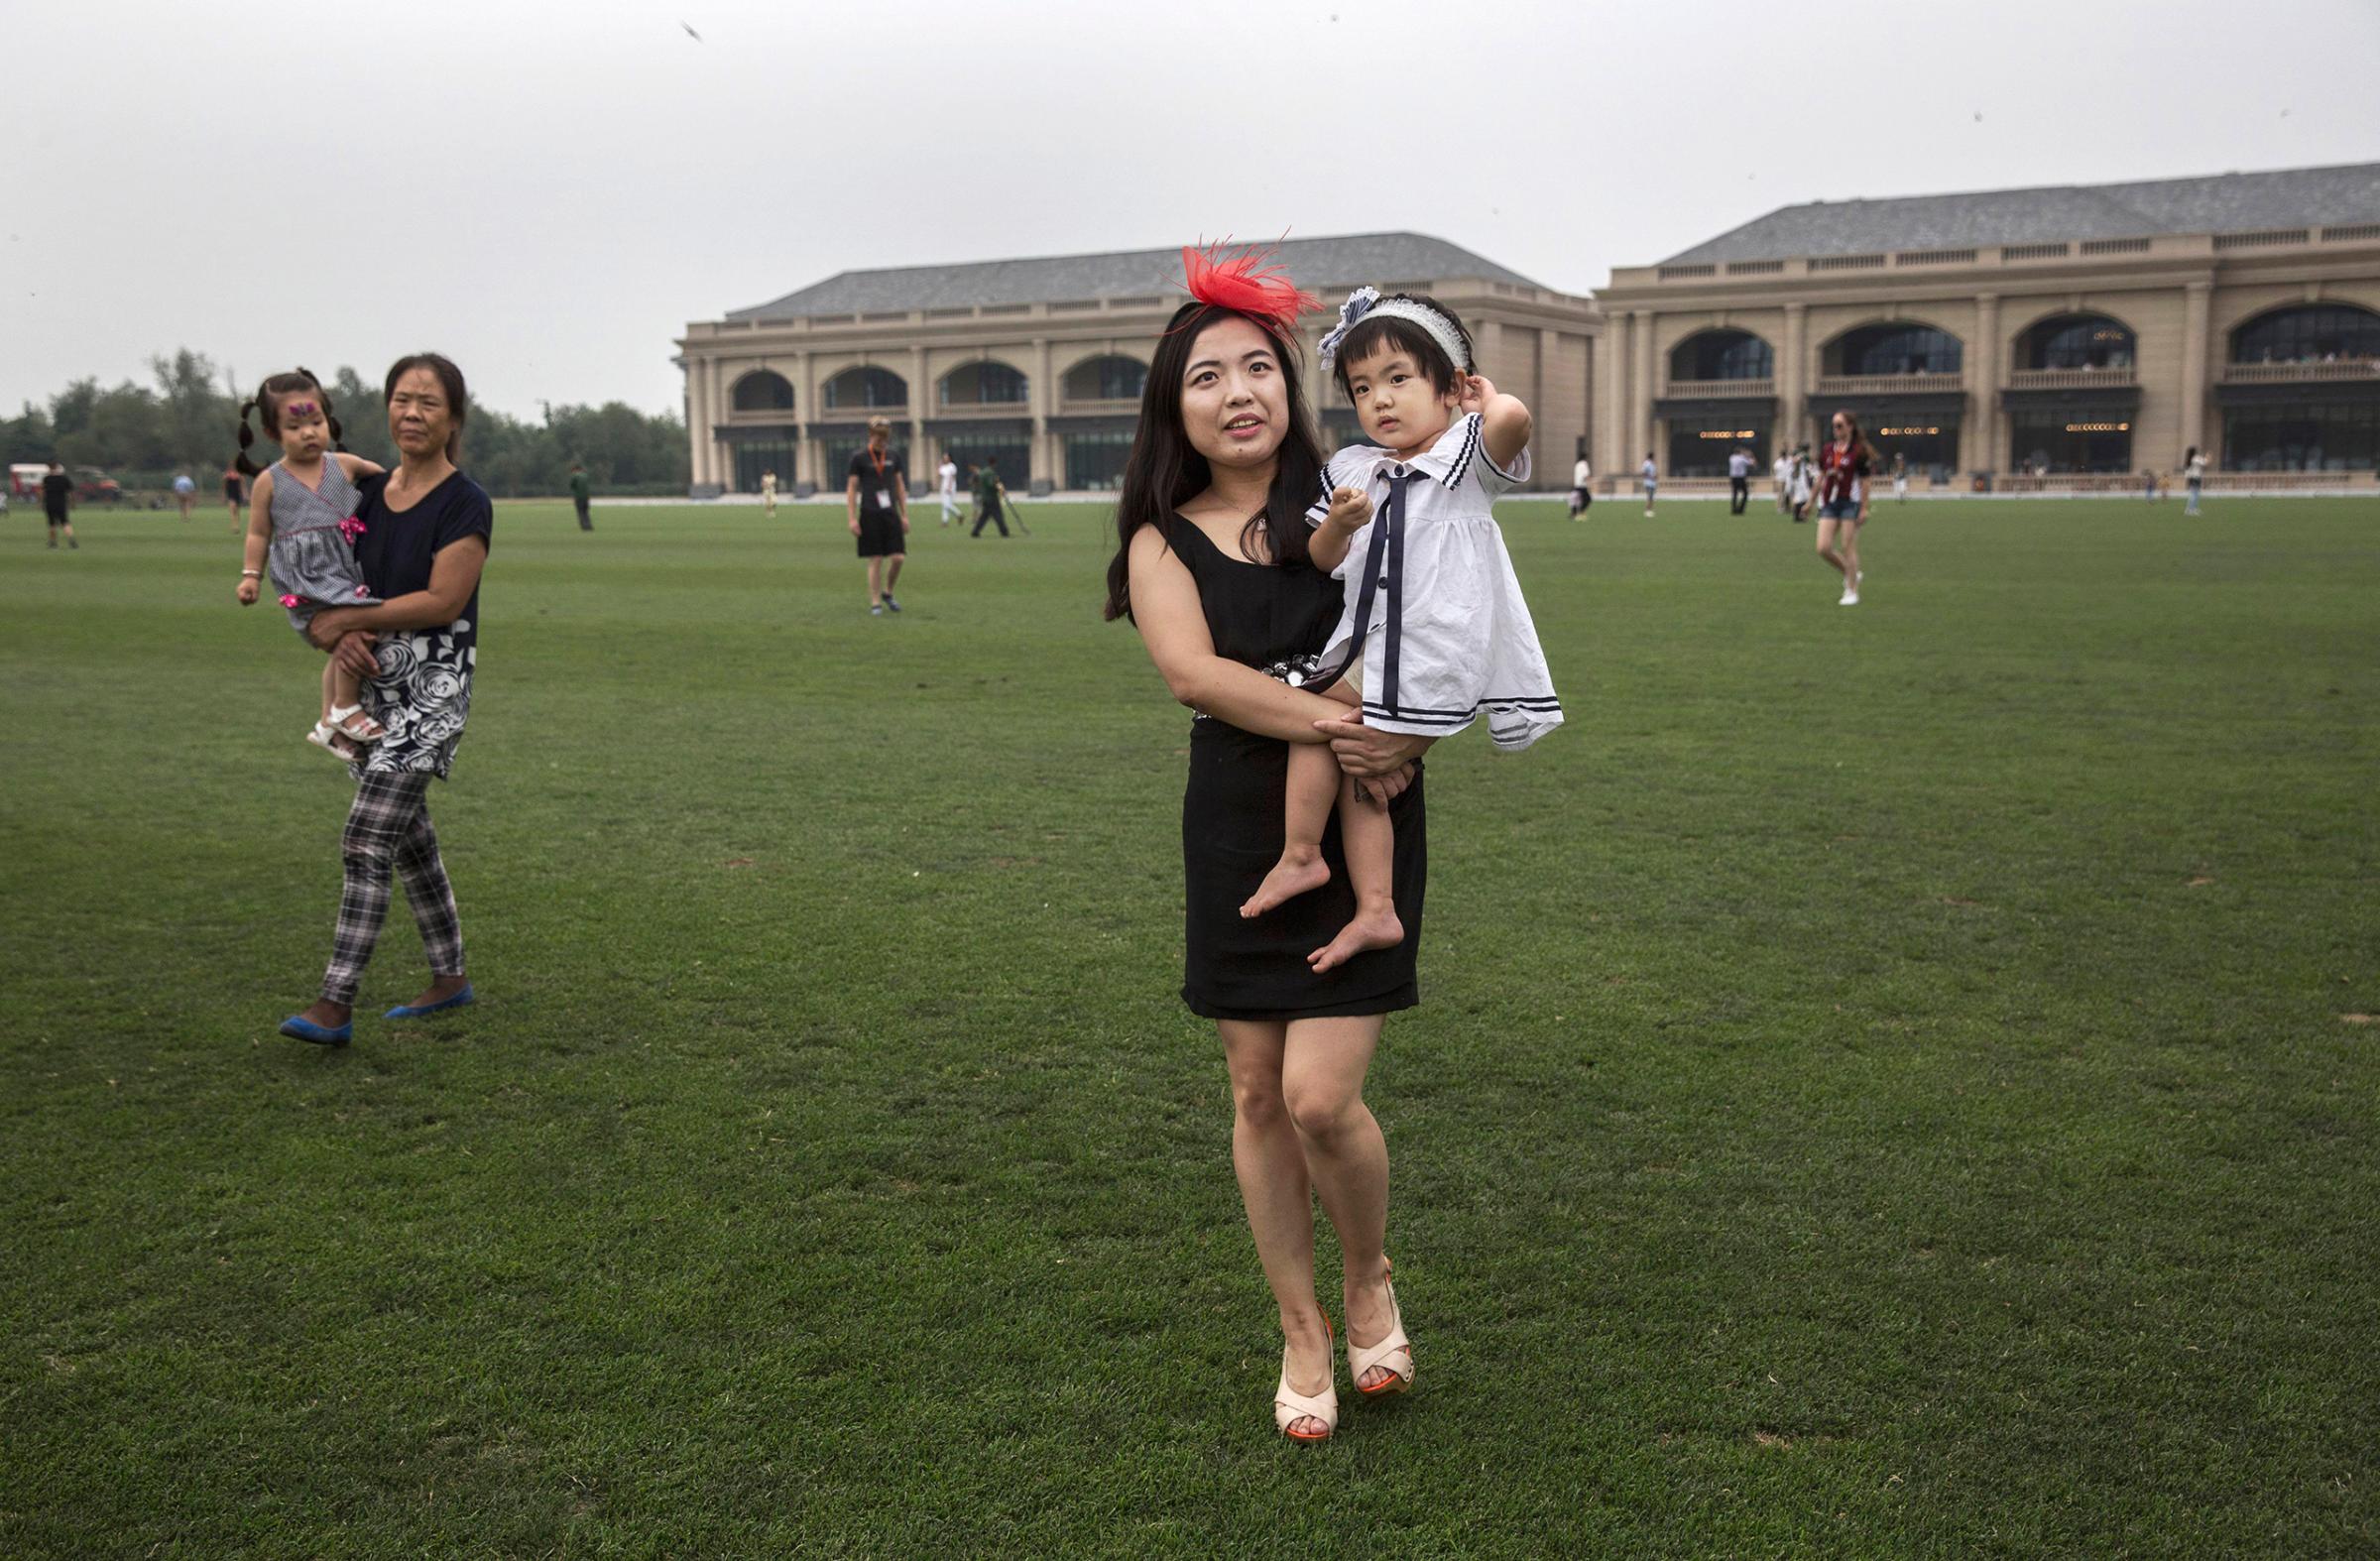 A woman walks across the field with her children during a break in an intervarsity match at the Tianjin Goldin Metropolitan Polo Club in Tianjin, China, on July 16, 2016.